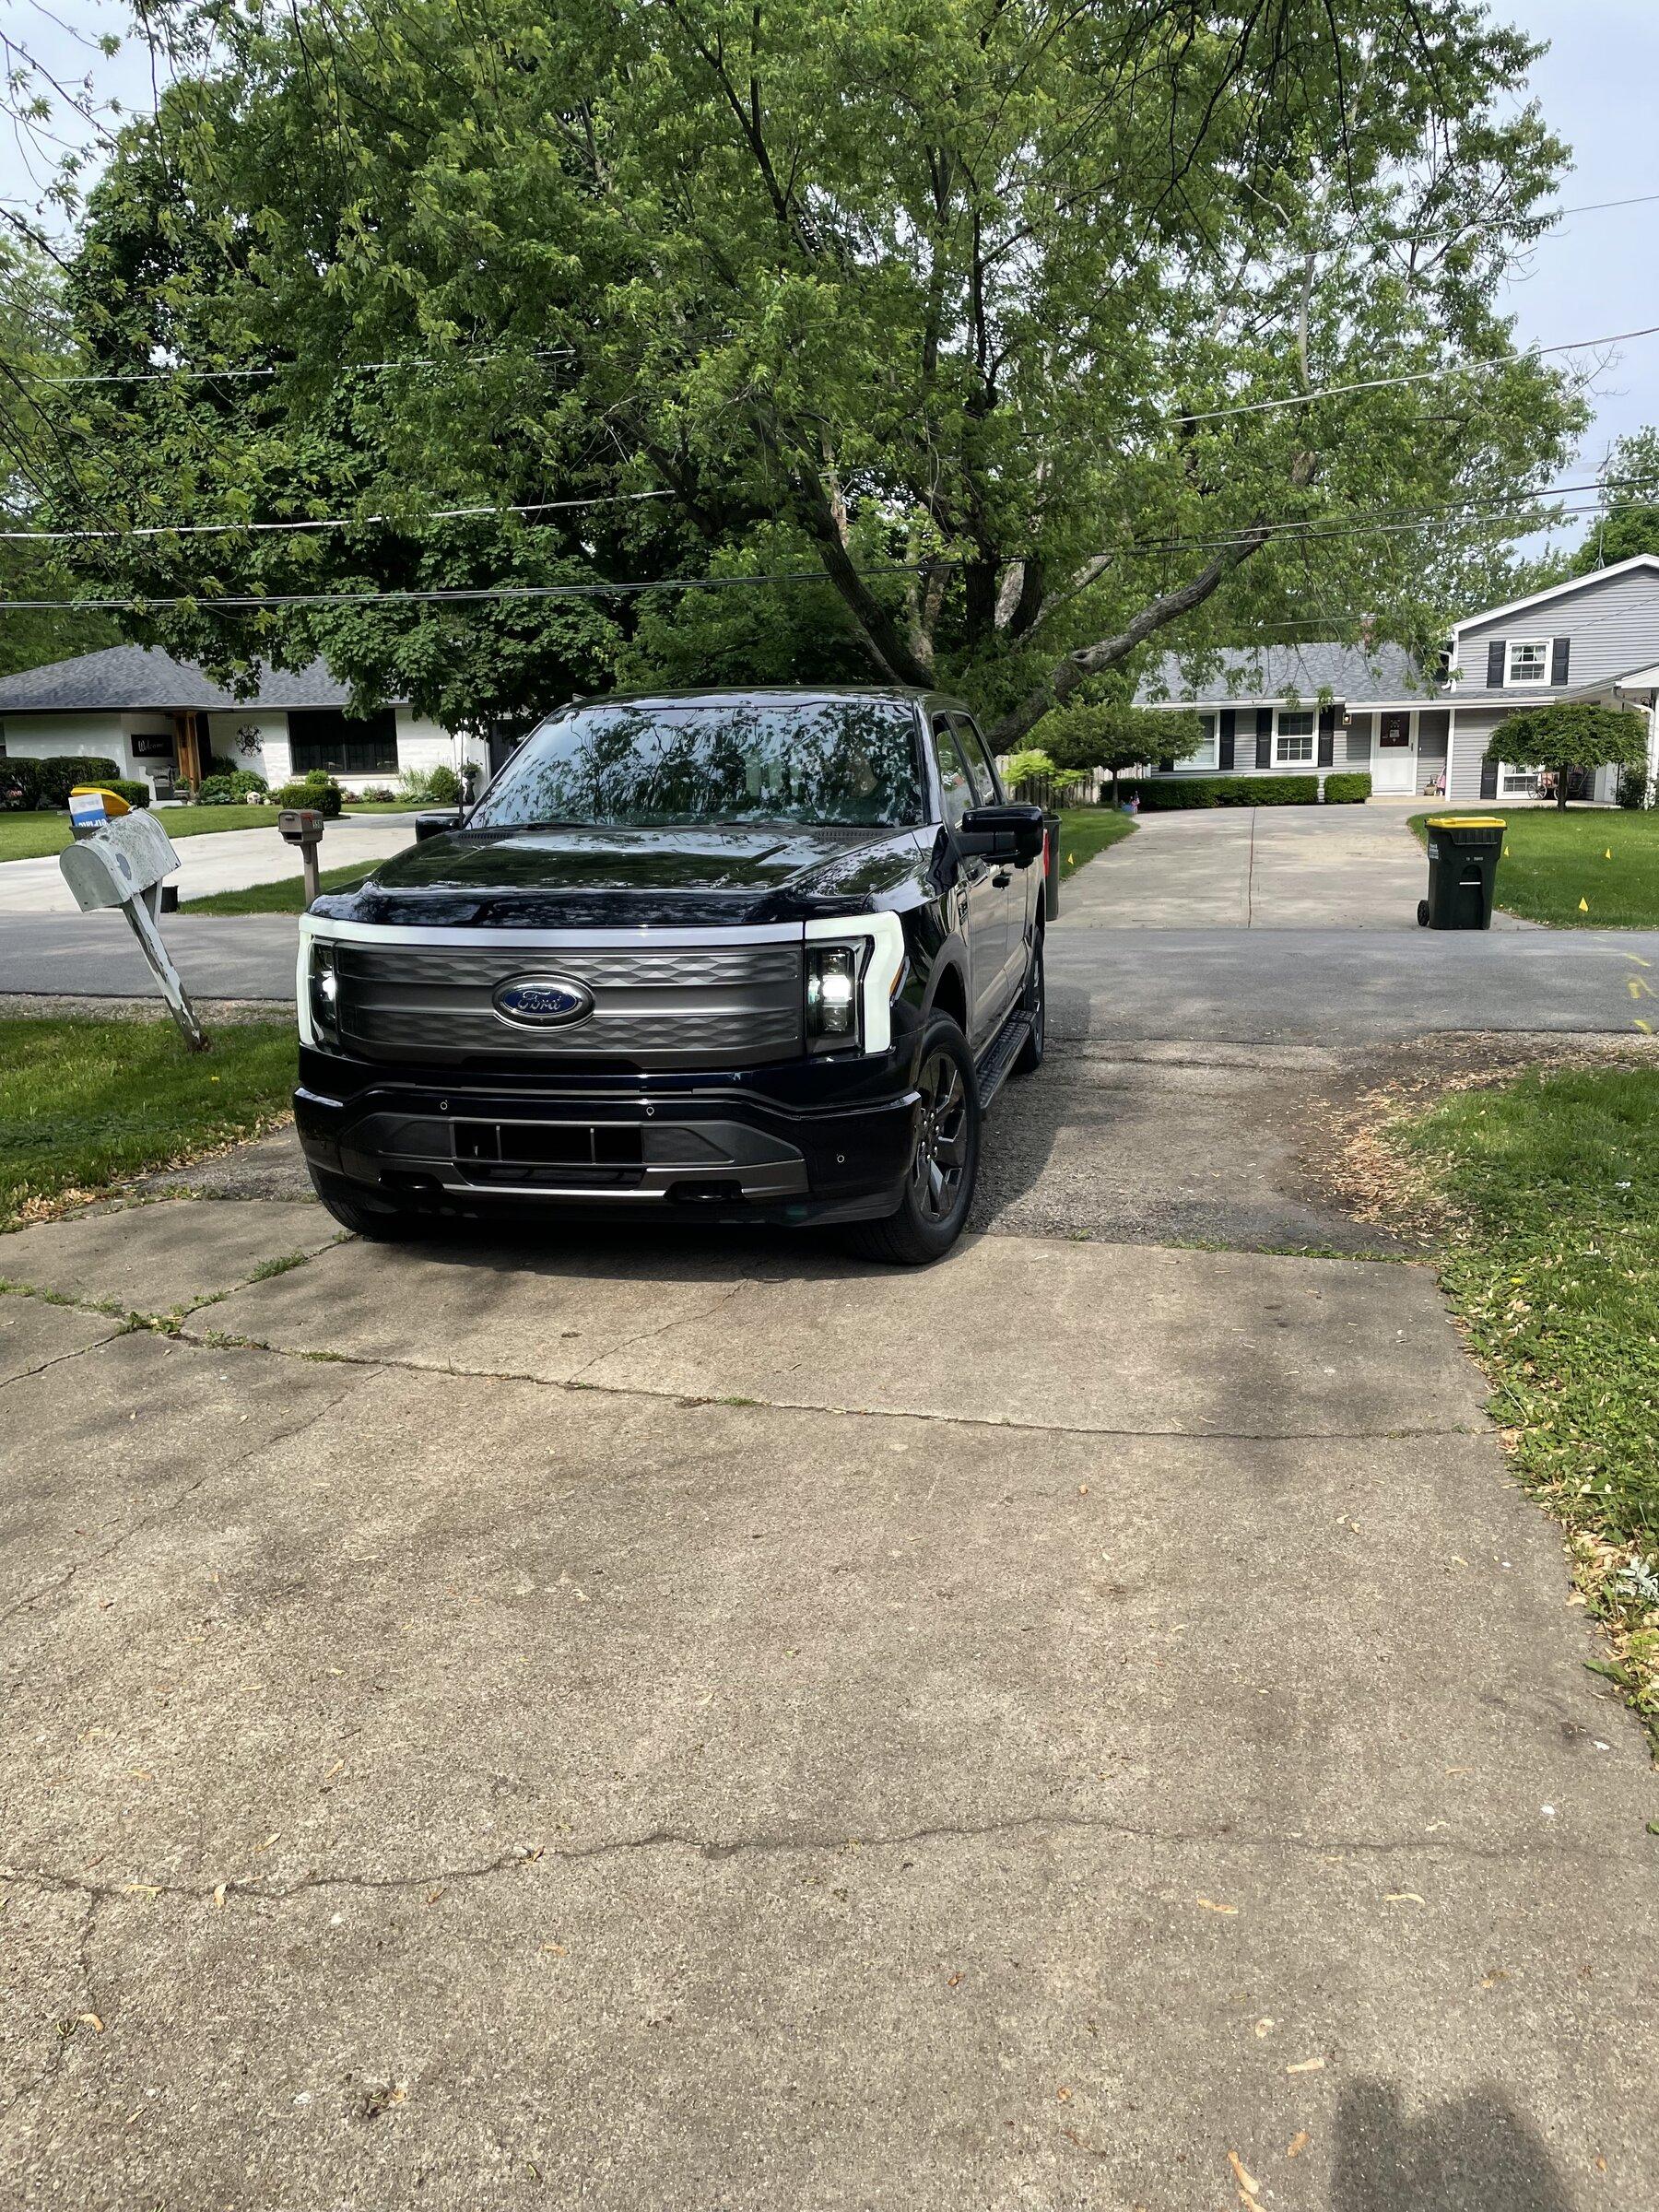 Ford F-150 Lightning Initial driving review impressions (Lightning Lariat OWNER) D0F864CA-225B-4F2E-A1D7-9263760FE583